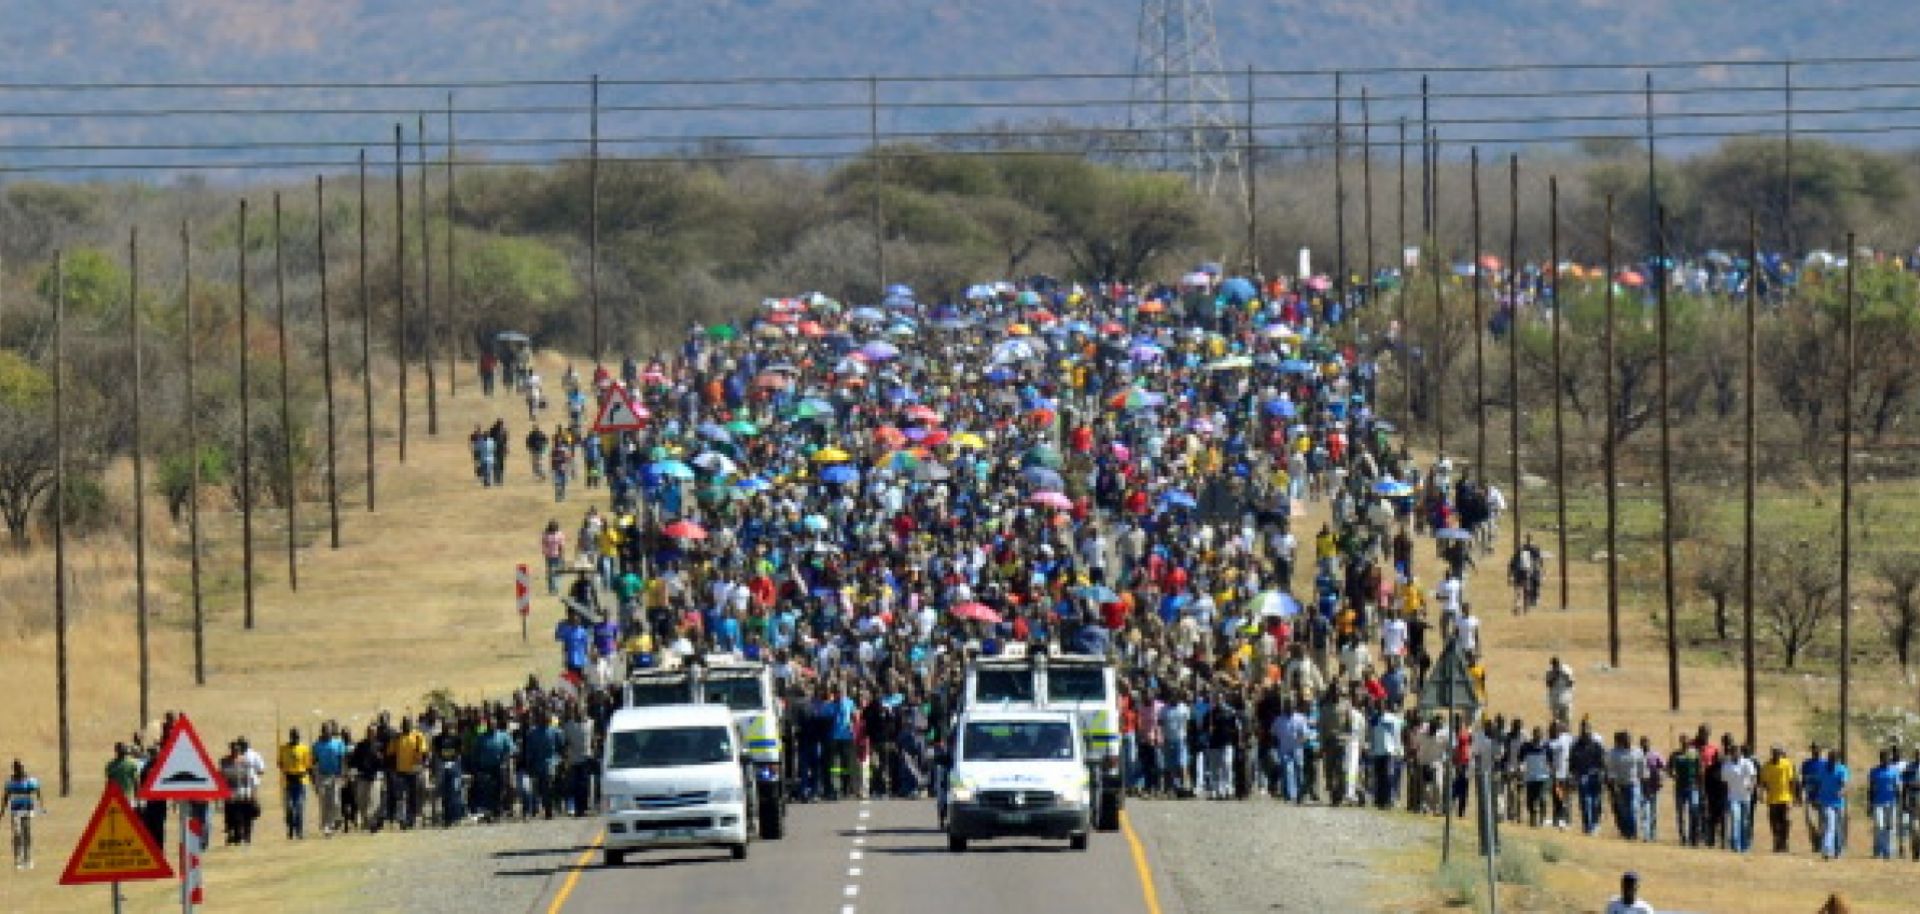 Thousands of South African mine workers walk to the Lonmin mine in Marikana on Sept. 10.